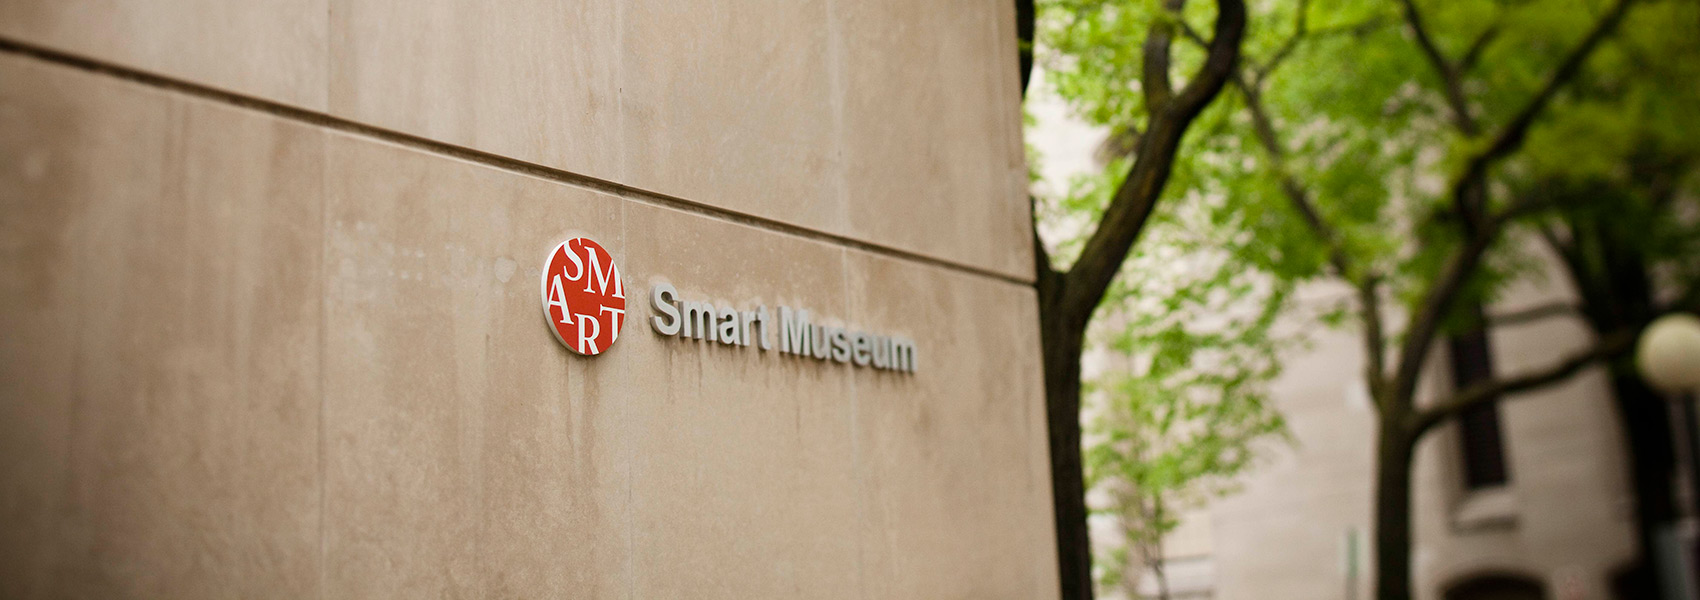 Exterior view of the Smart Museum